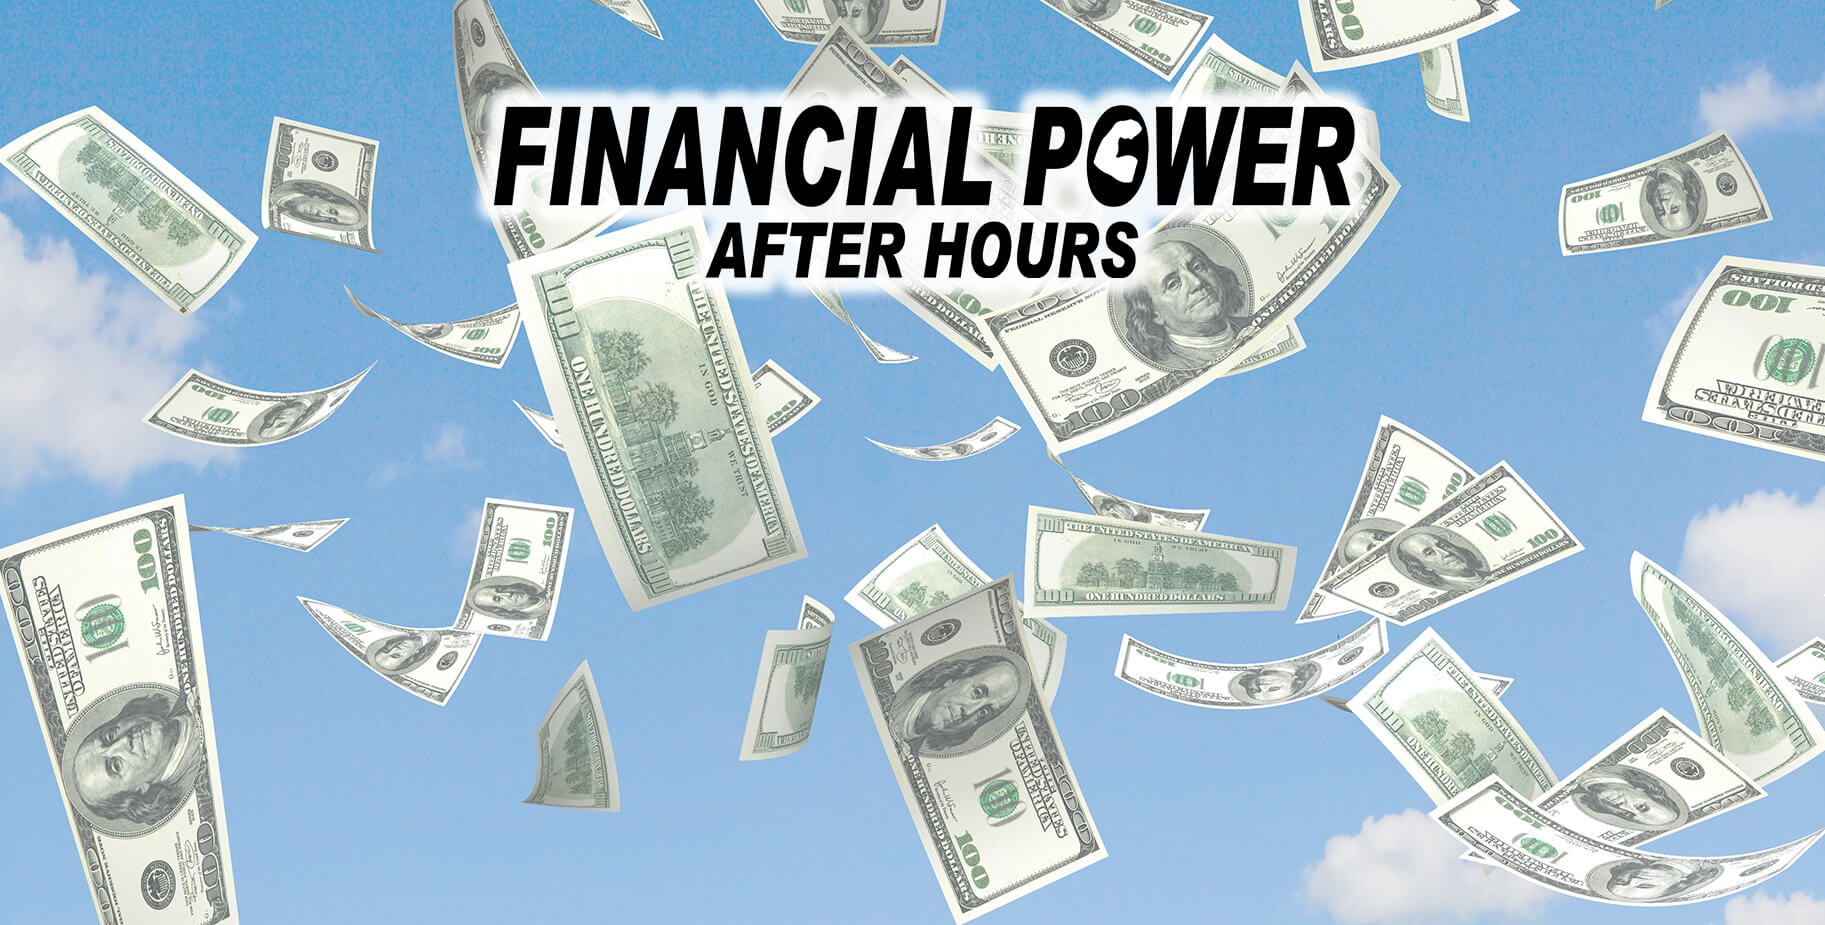 Financial Power After Hours